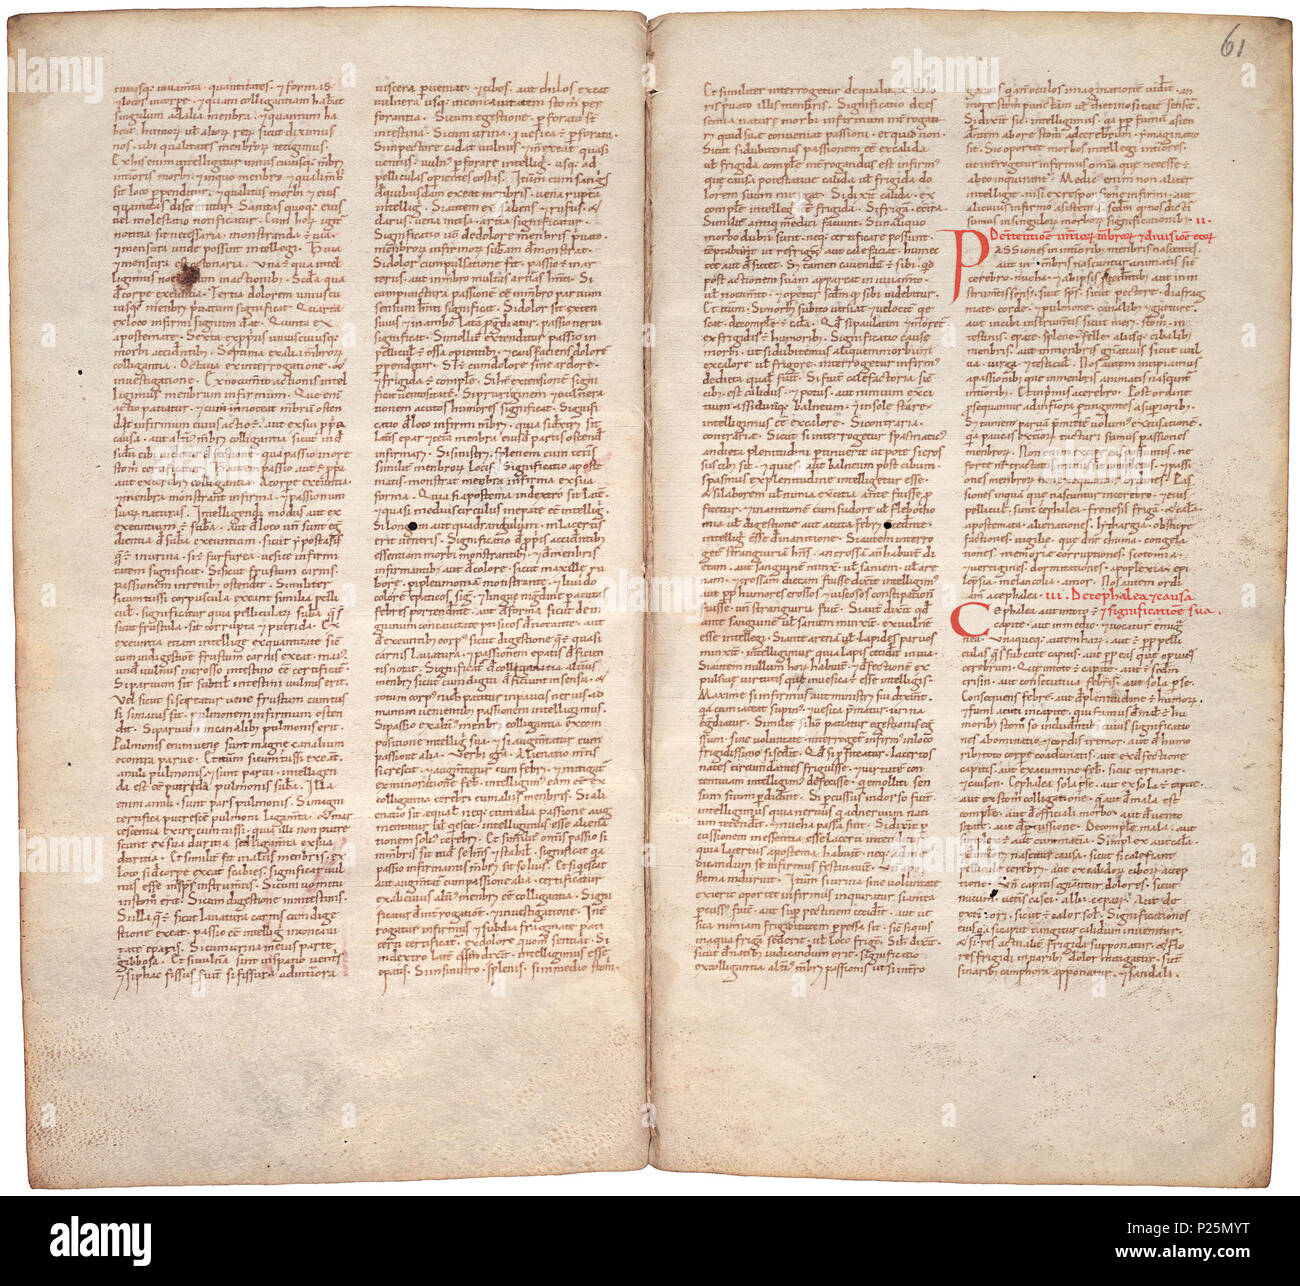 . Pantegni pars prima theorica (lib. I-X) - folios 060v (left) and 061r (right)  .  Lefthand side folio 060v; righthand side folio 061r from an 11th century copy of the Liber pantegni. This is the earliest known copy (prior to 1086) of the Liber pantegni, made at Monte Cassino under the supervision of Constantine the African. It is dedicated to Abbot Desiderius of Monte Cassino (1027-1087), before he became Pope Victor III. Read backgroud information in Dutch and in English. . Constantine the African (ca. 1010-1098/9) 176 Liber pantegni - KB 73 J 6 - folios 060v (left) and 061r (right) Stock Photo